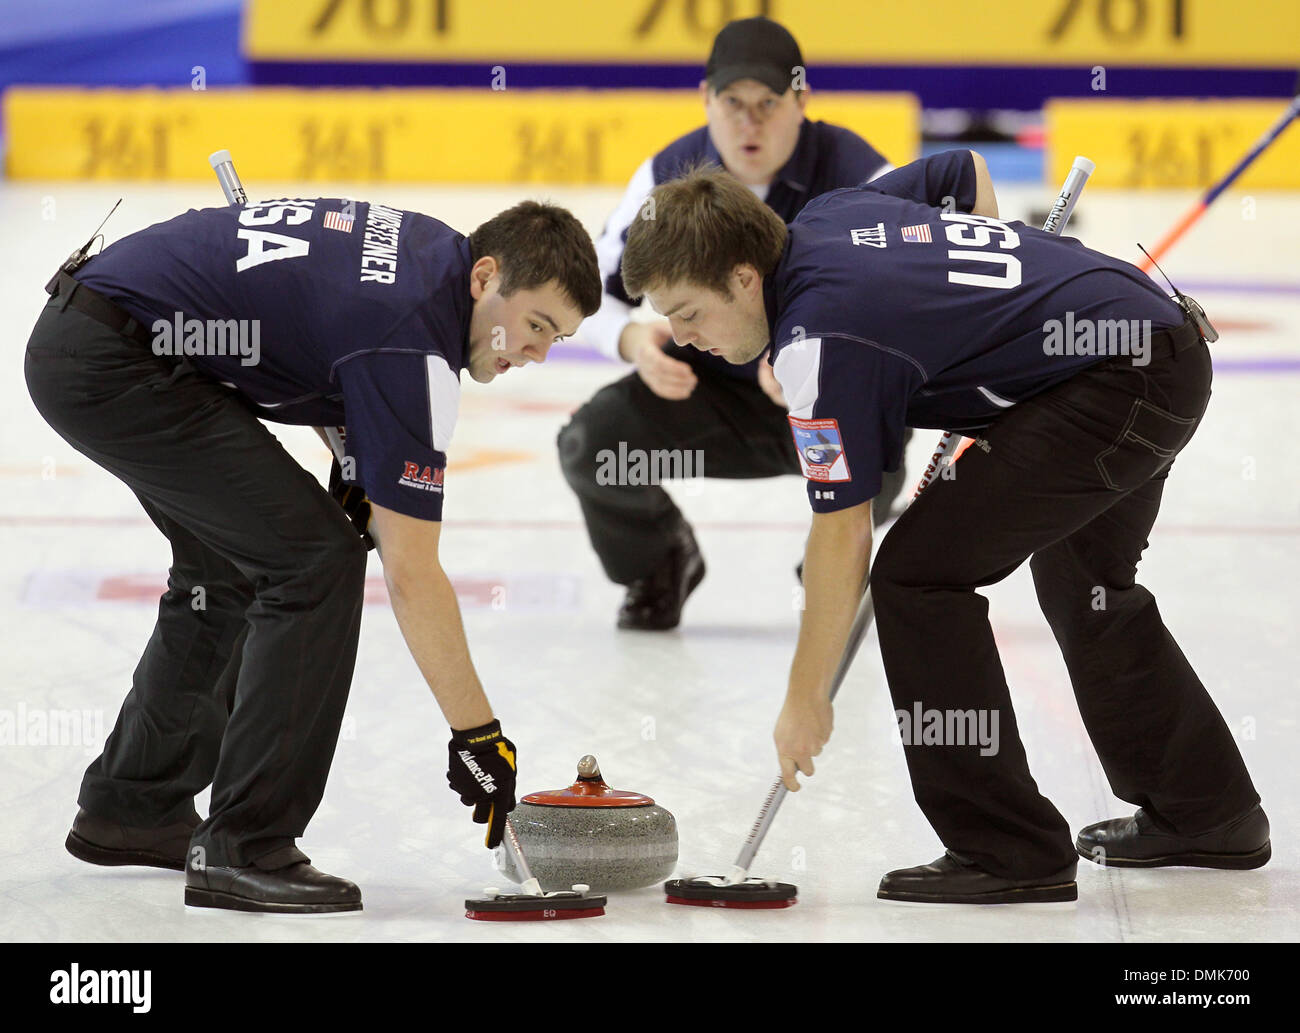 Fuessen, Germany. 14th Dec, 2013. US curlers Curler John Landsteiner (L-R), John Shuster and Jared Zezel compete against South Korea at the olympic qualification at Arena Fuessen in Fuessen, Germany, 14 December 2013. Photo: KARL-JOSEF HILDENBRAND/dpa/Alamy Live News Stock Photo